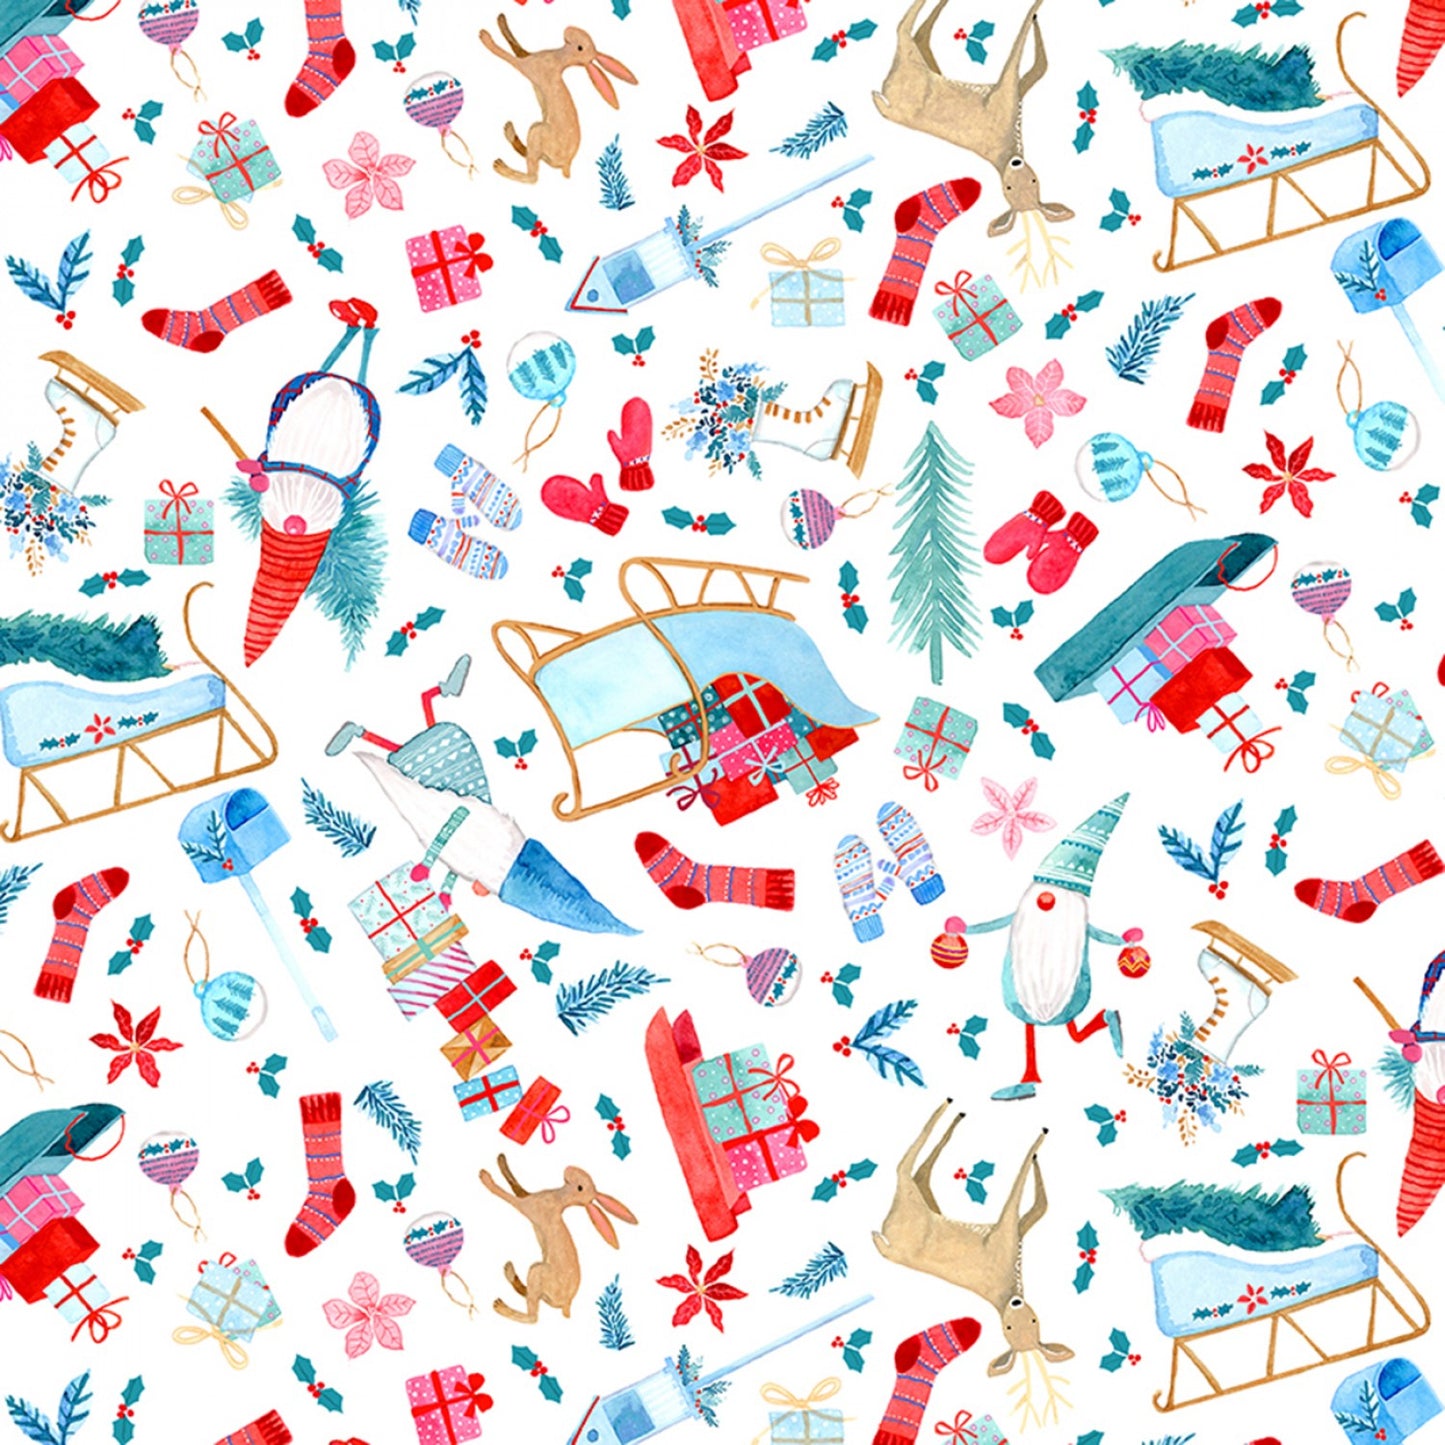 Timeless Treasures Gnome Fabric - White Assorted White Christmas - TT01224 - CD2032-WHITE - Gnome For Christmas - Cotton Fabric